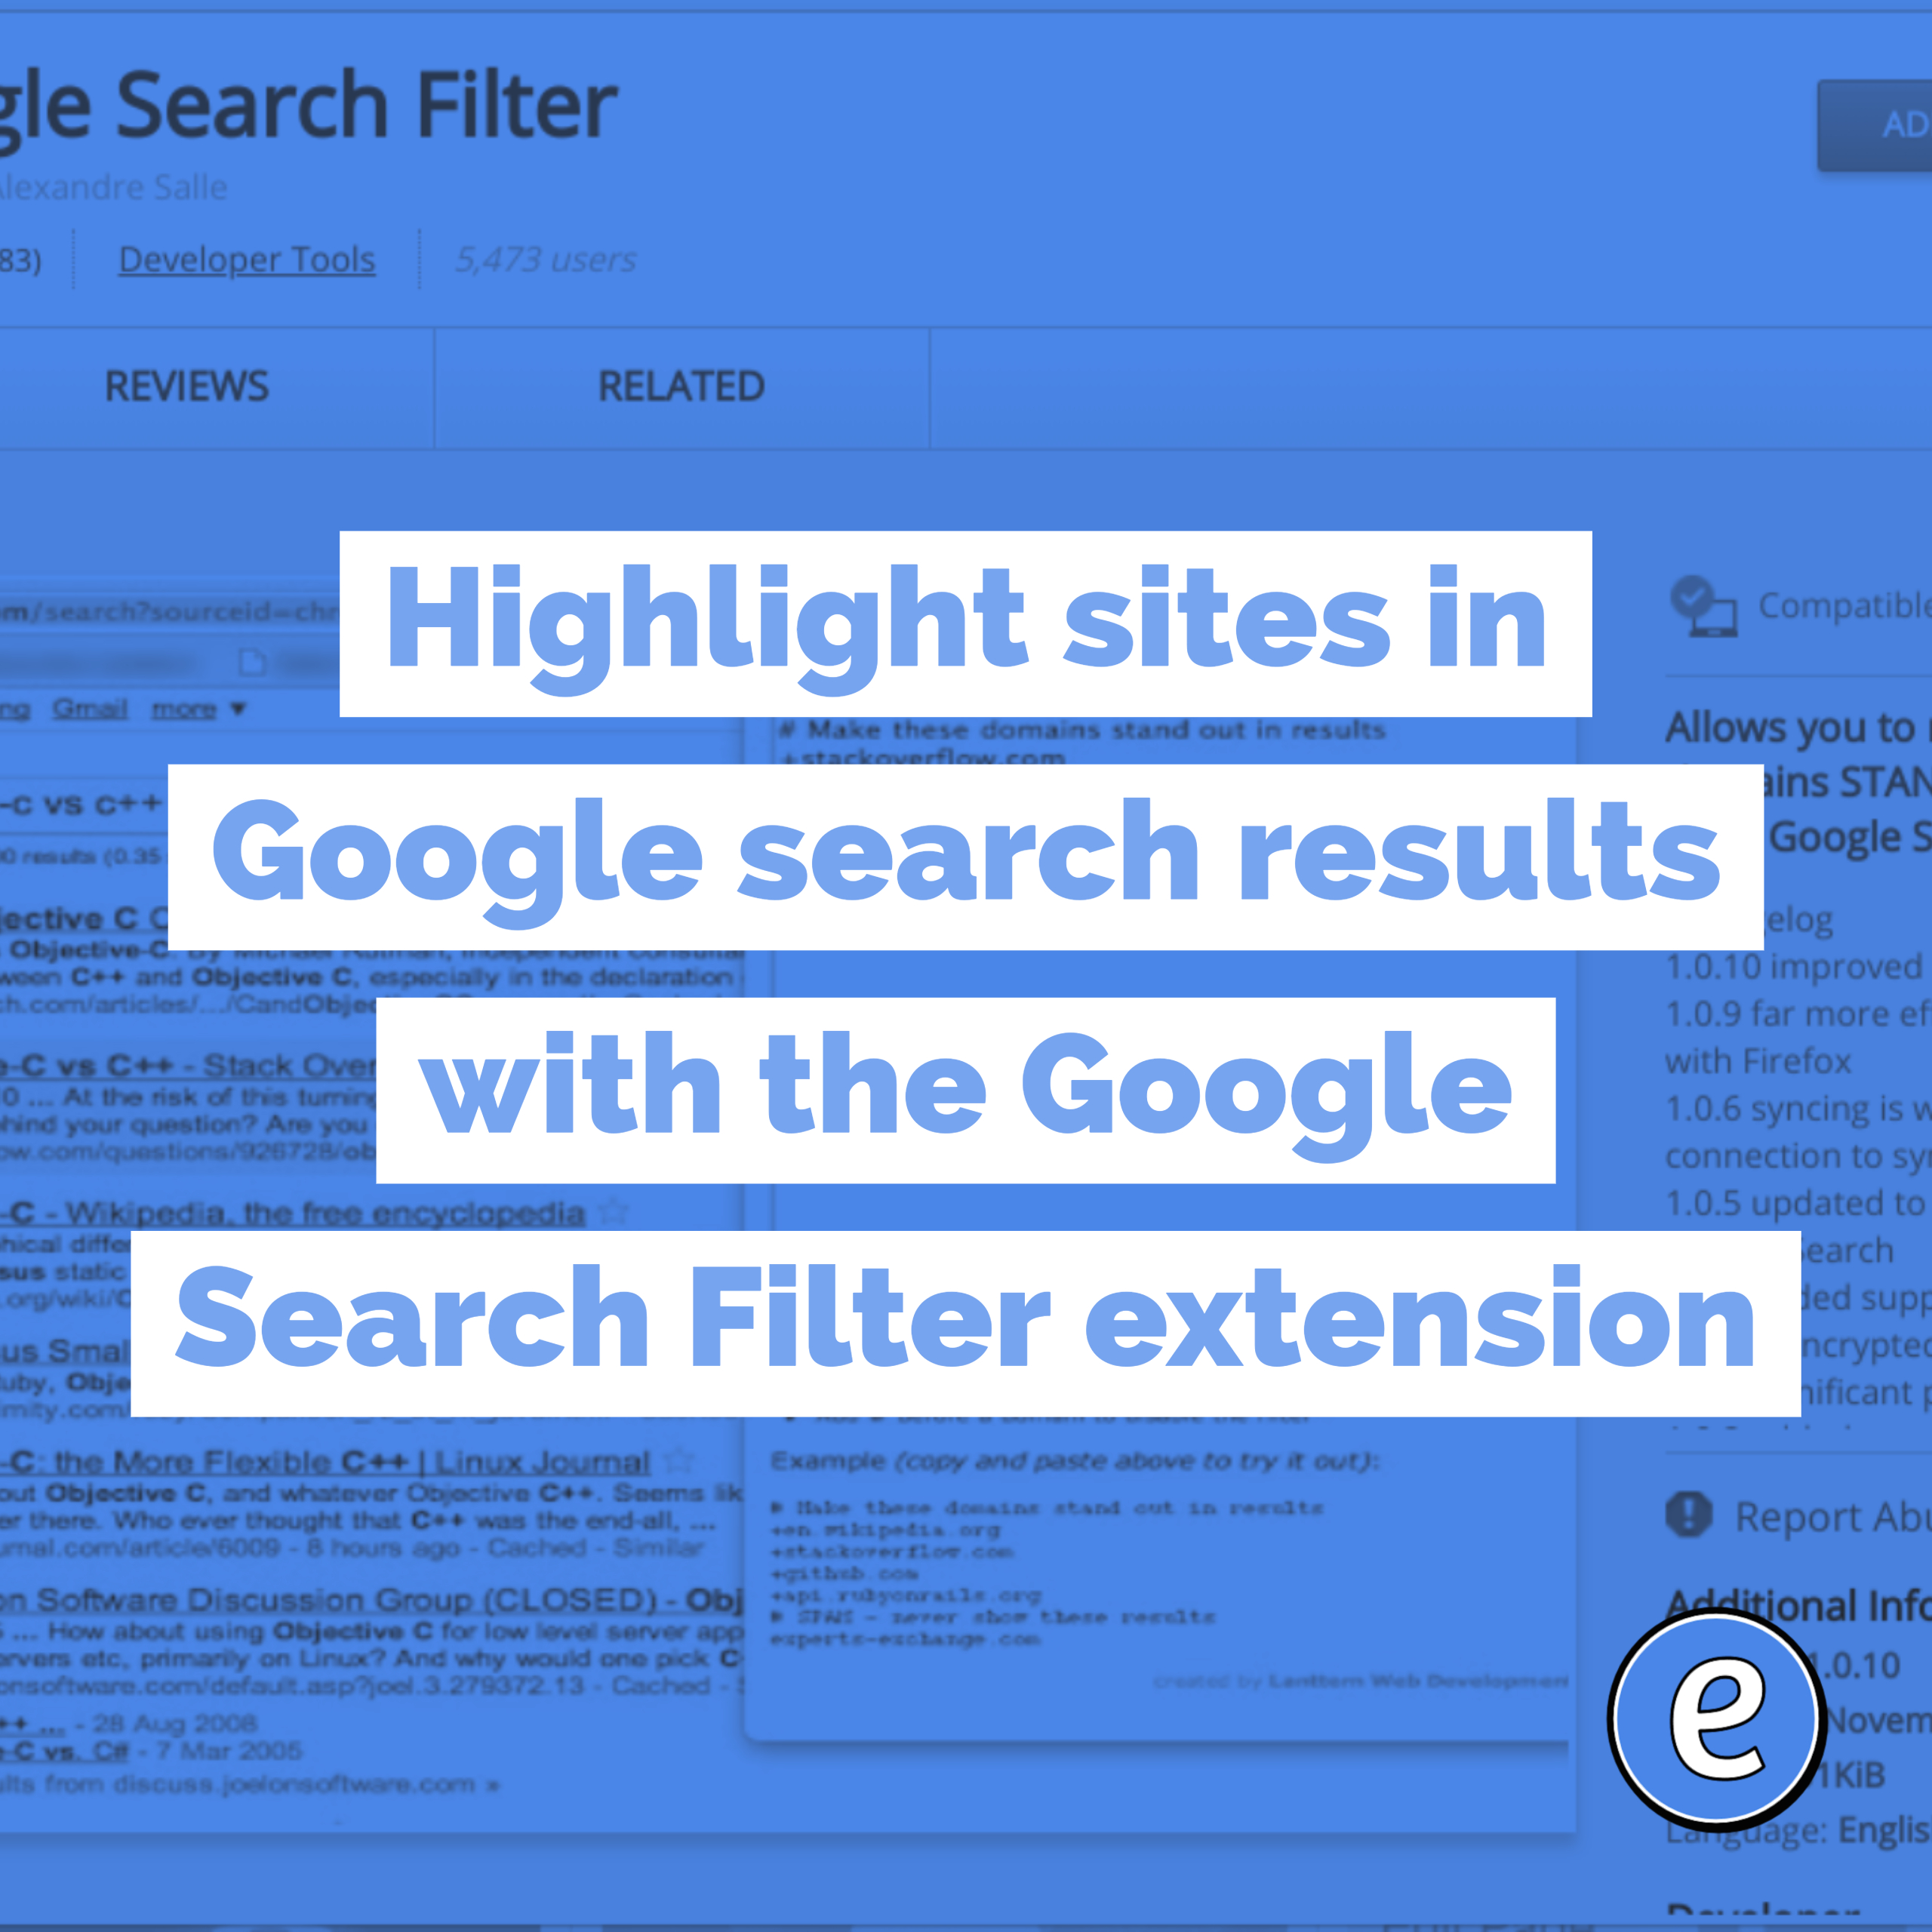 Highlight sites in Google search results with the Google Search Filter extension